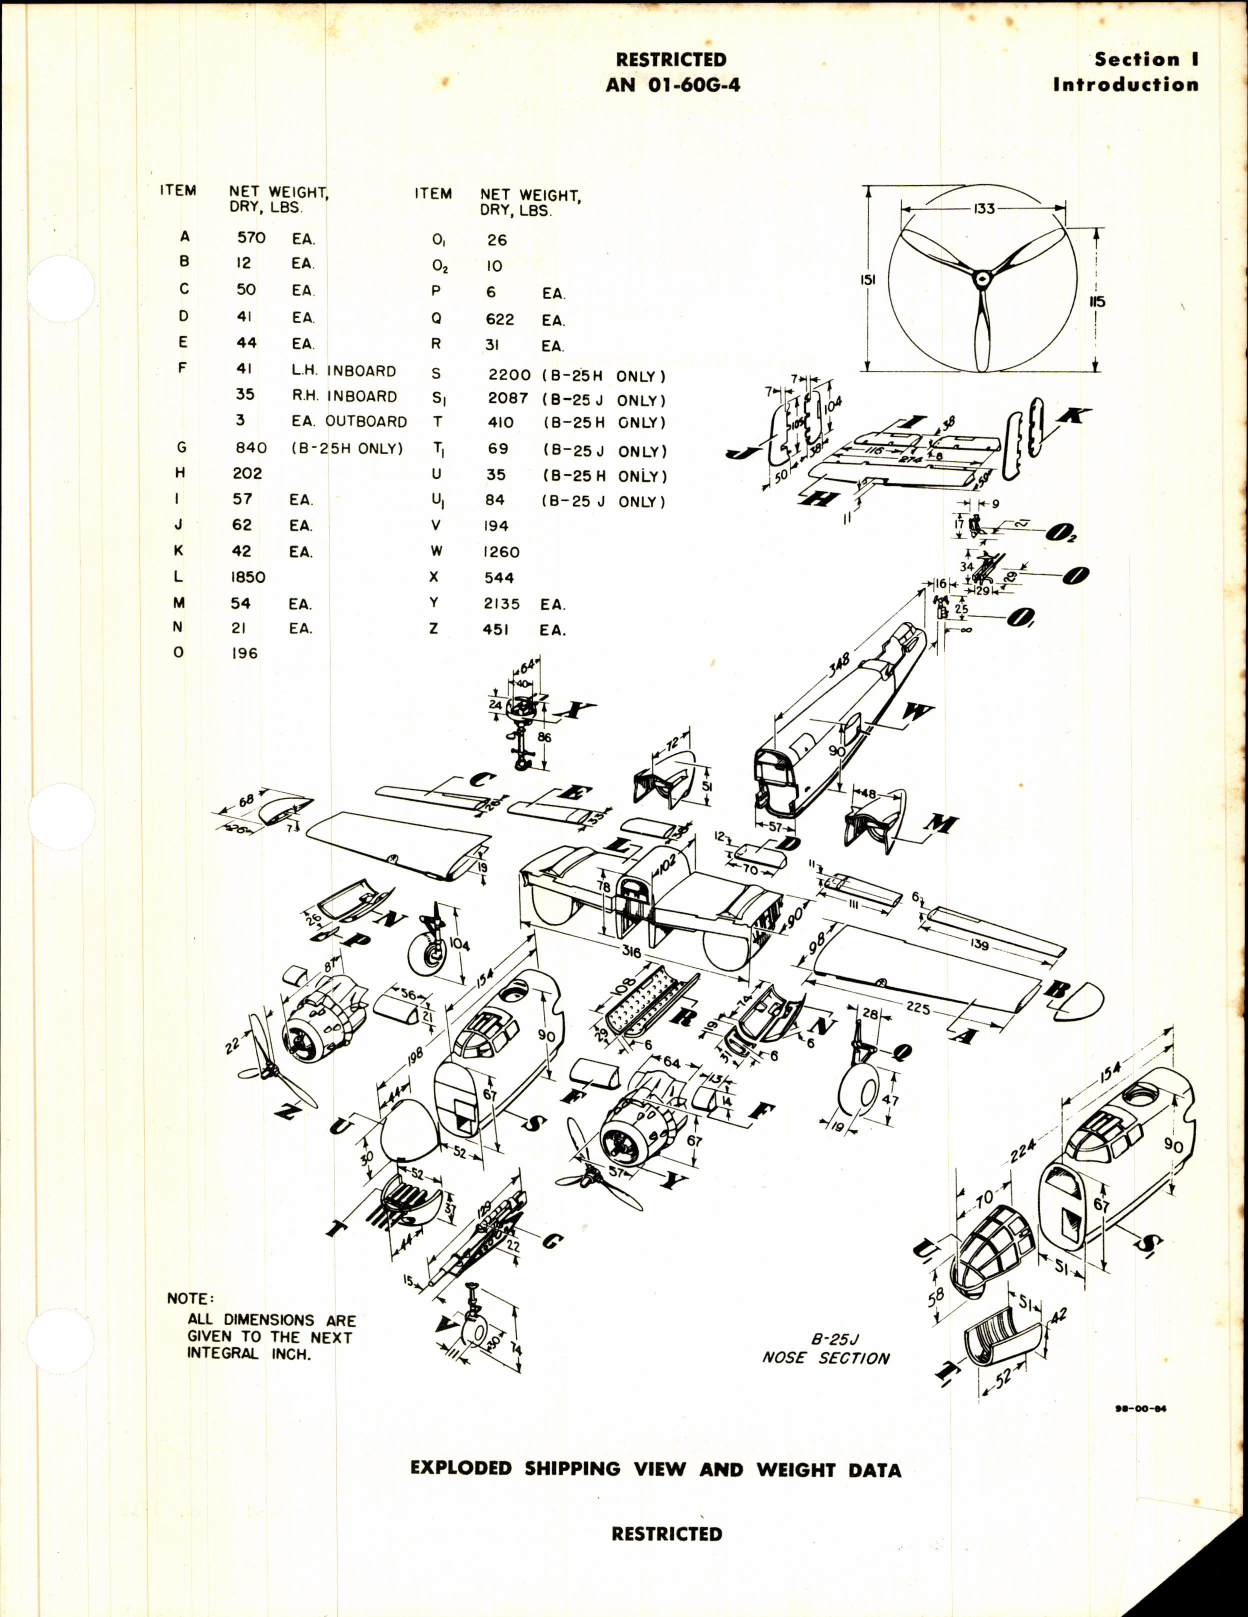 Sample page 7 from AirCorps Library document: Parts Catalog for B-25H and B-25J